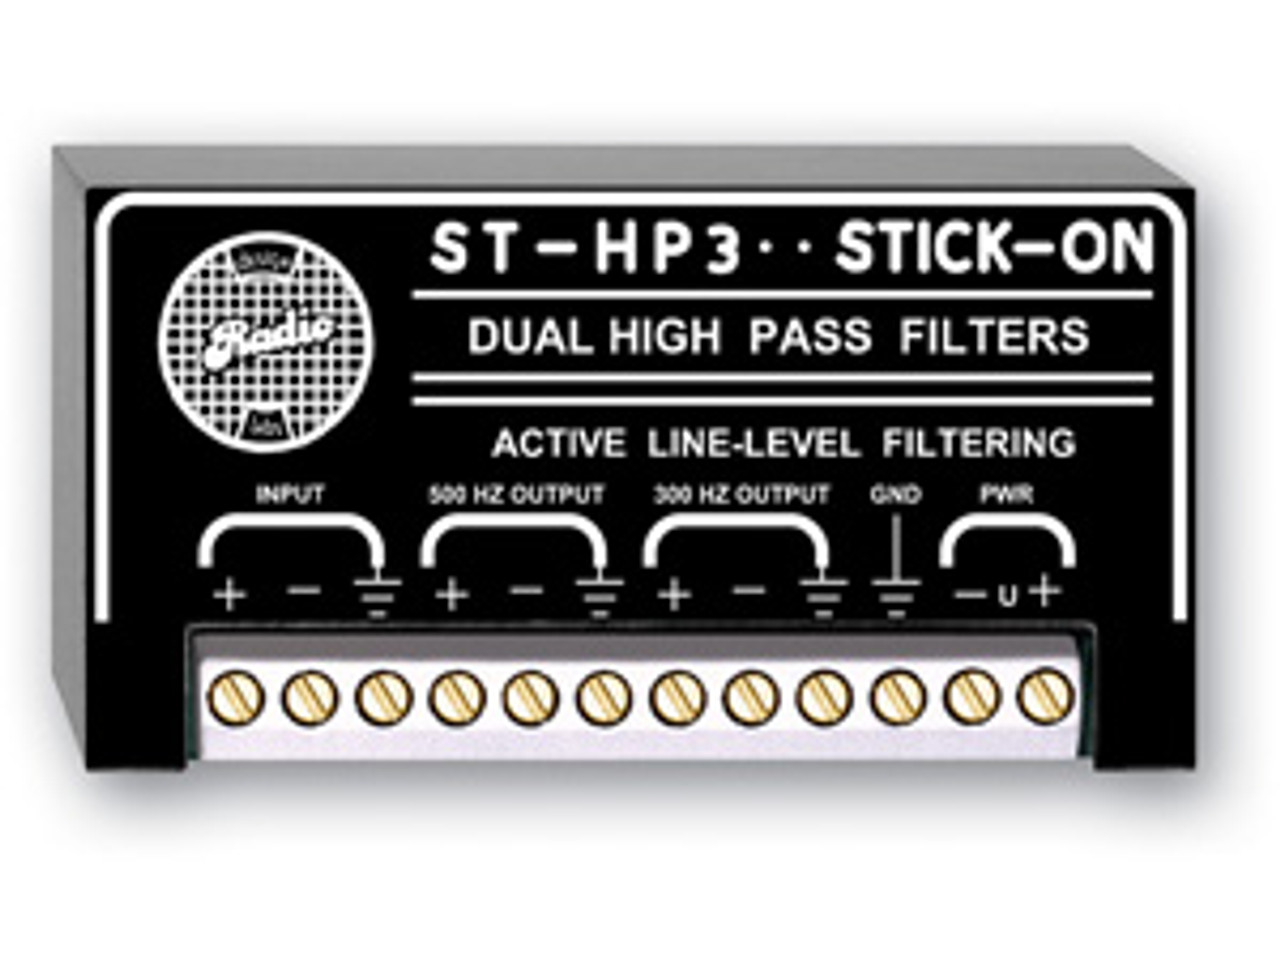 RDL ST-HP3 Stick-On Series Dual High-Pass Filters (ST-HP3)